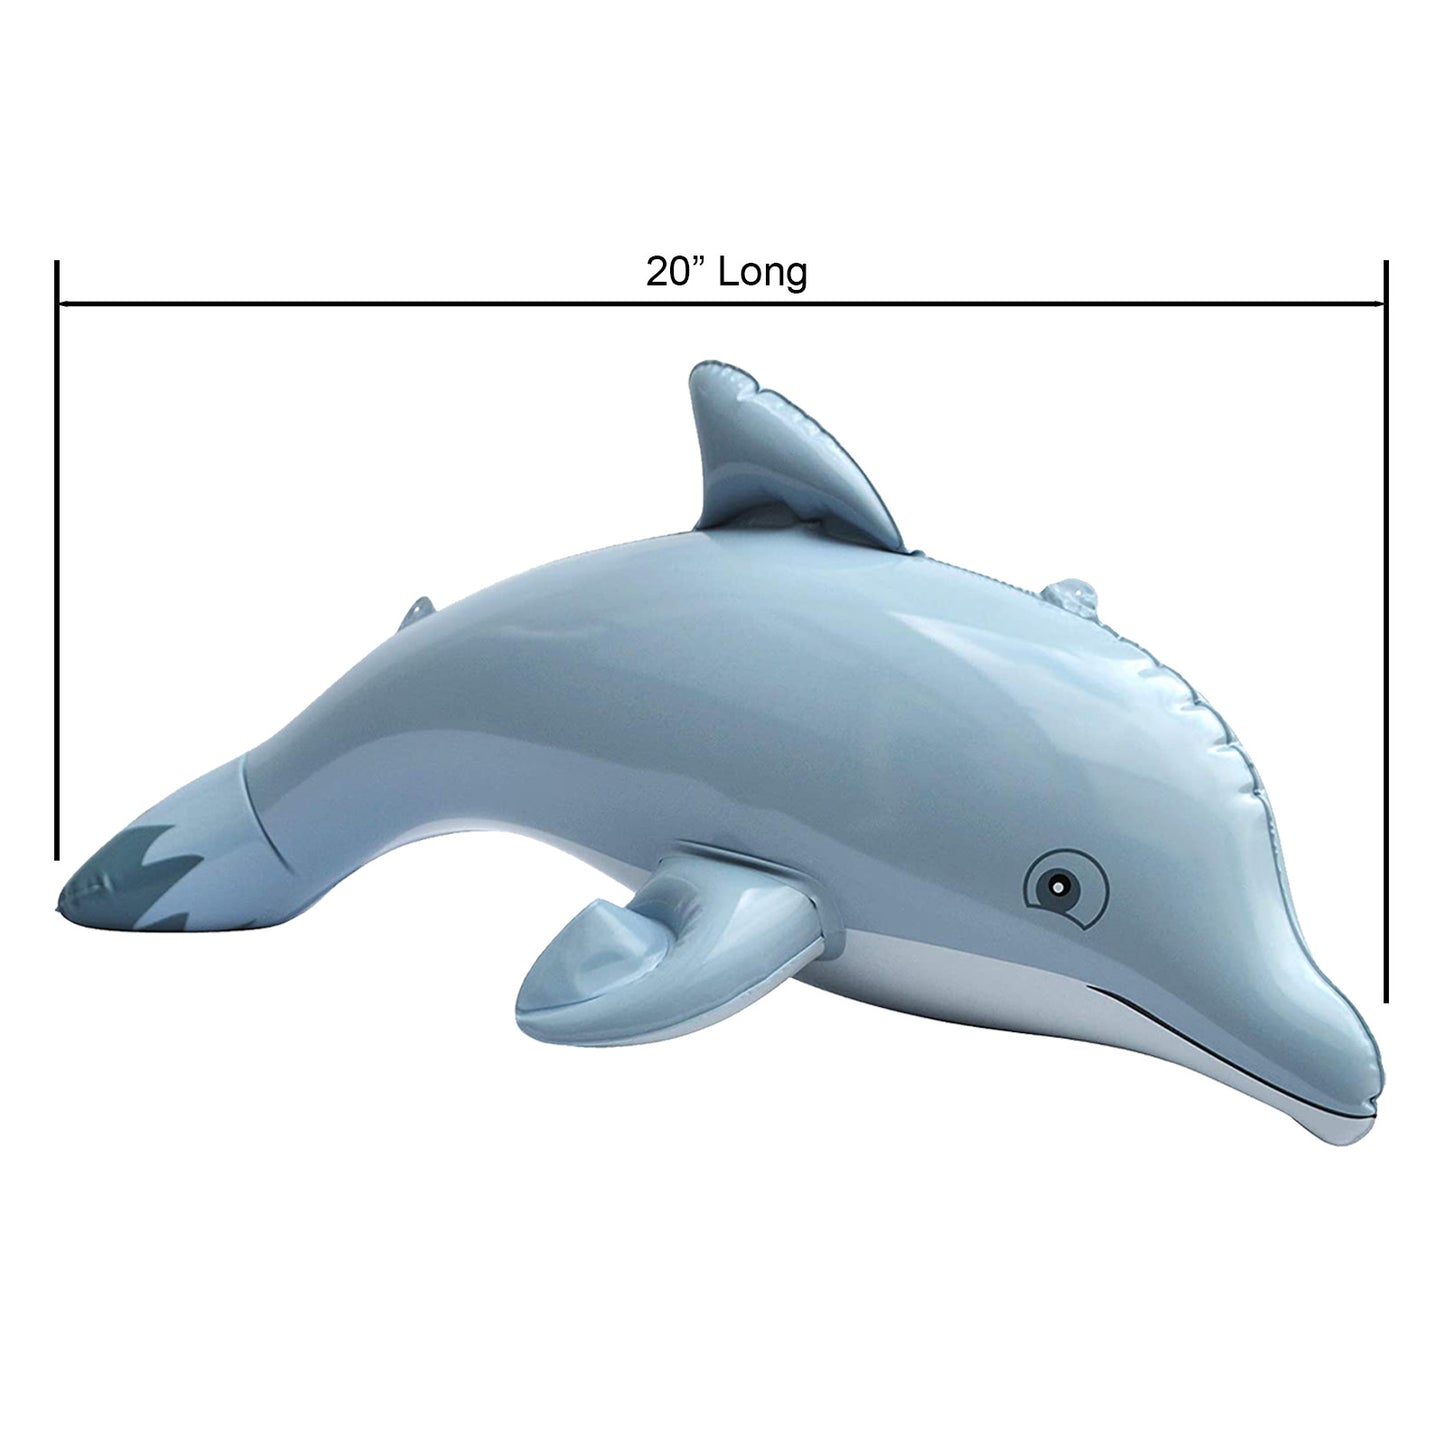 AN-DOL4 20" Dolphin - Size